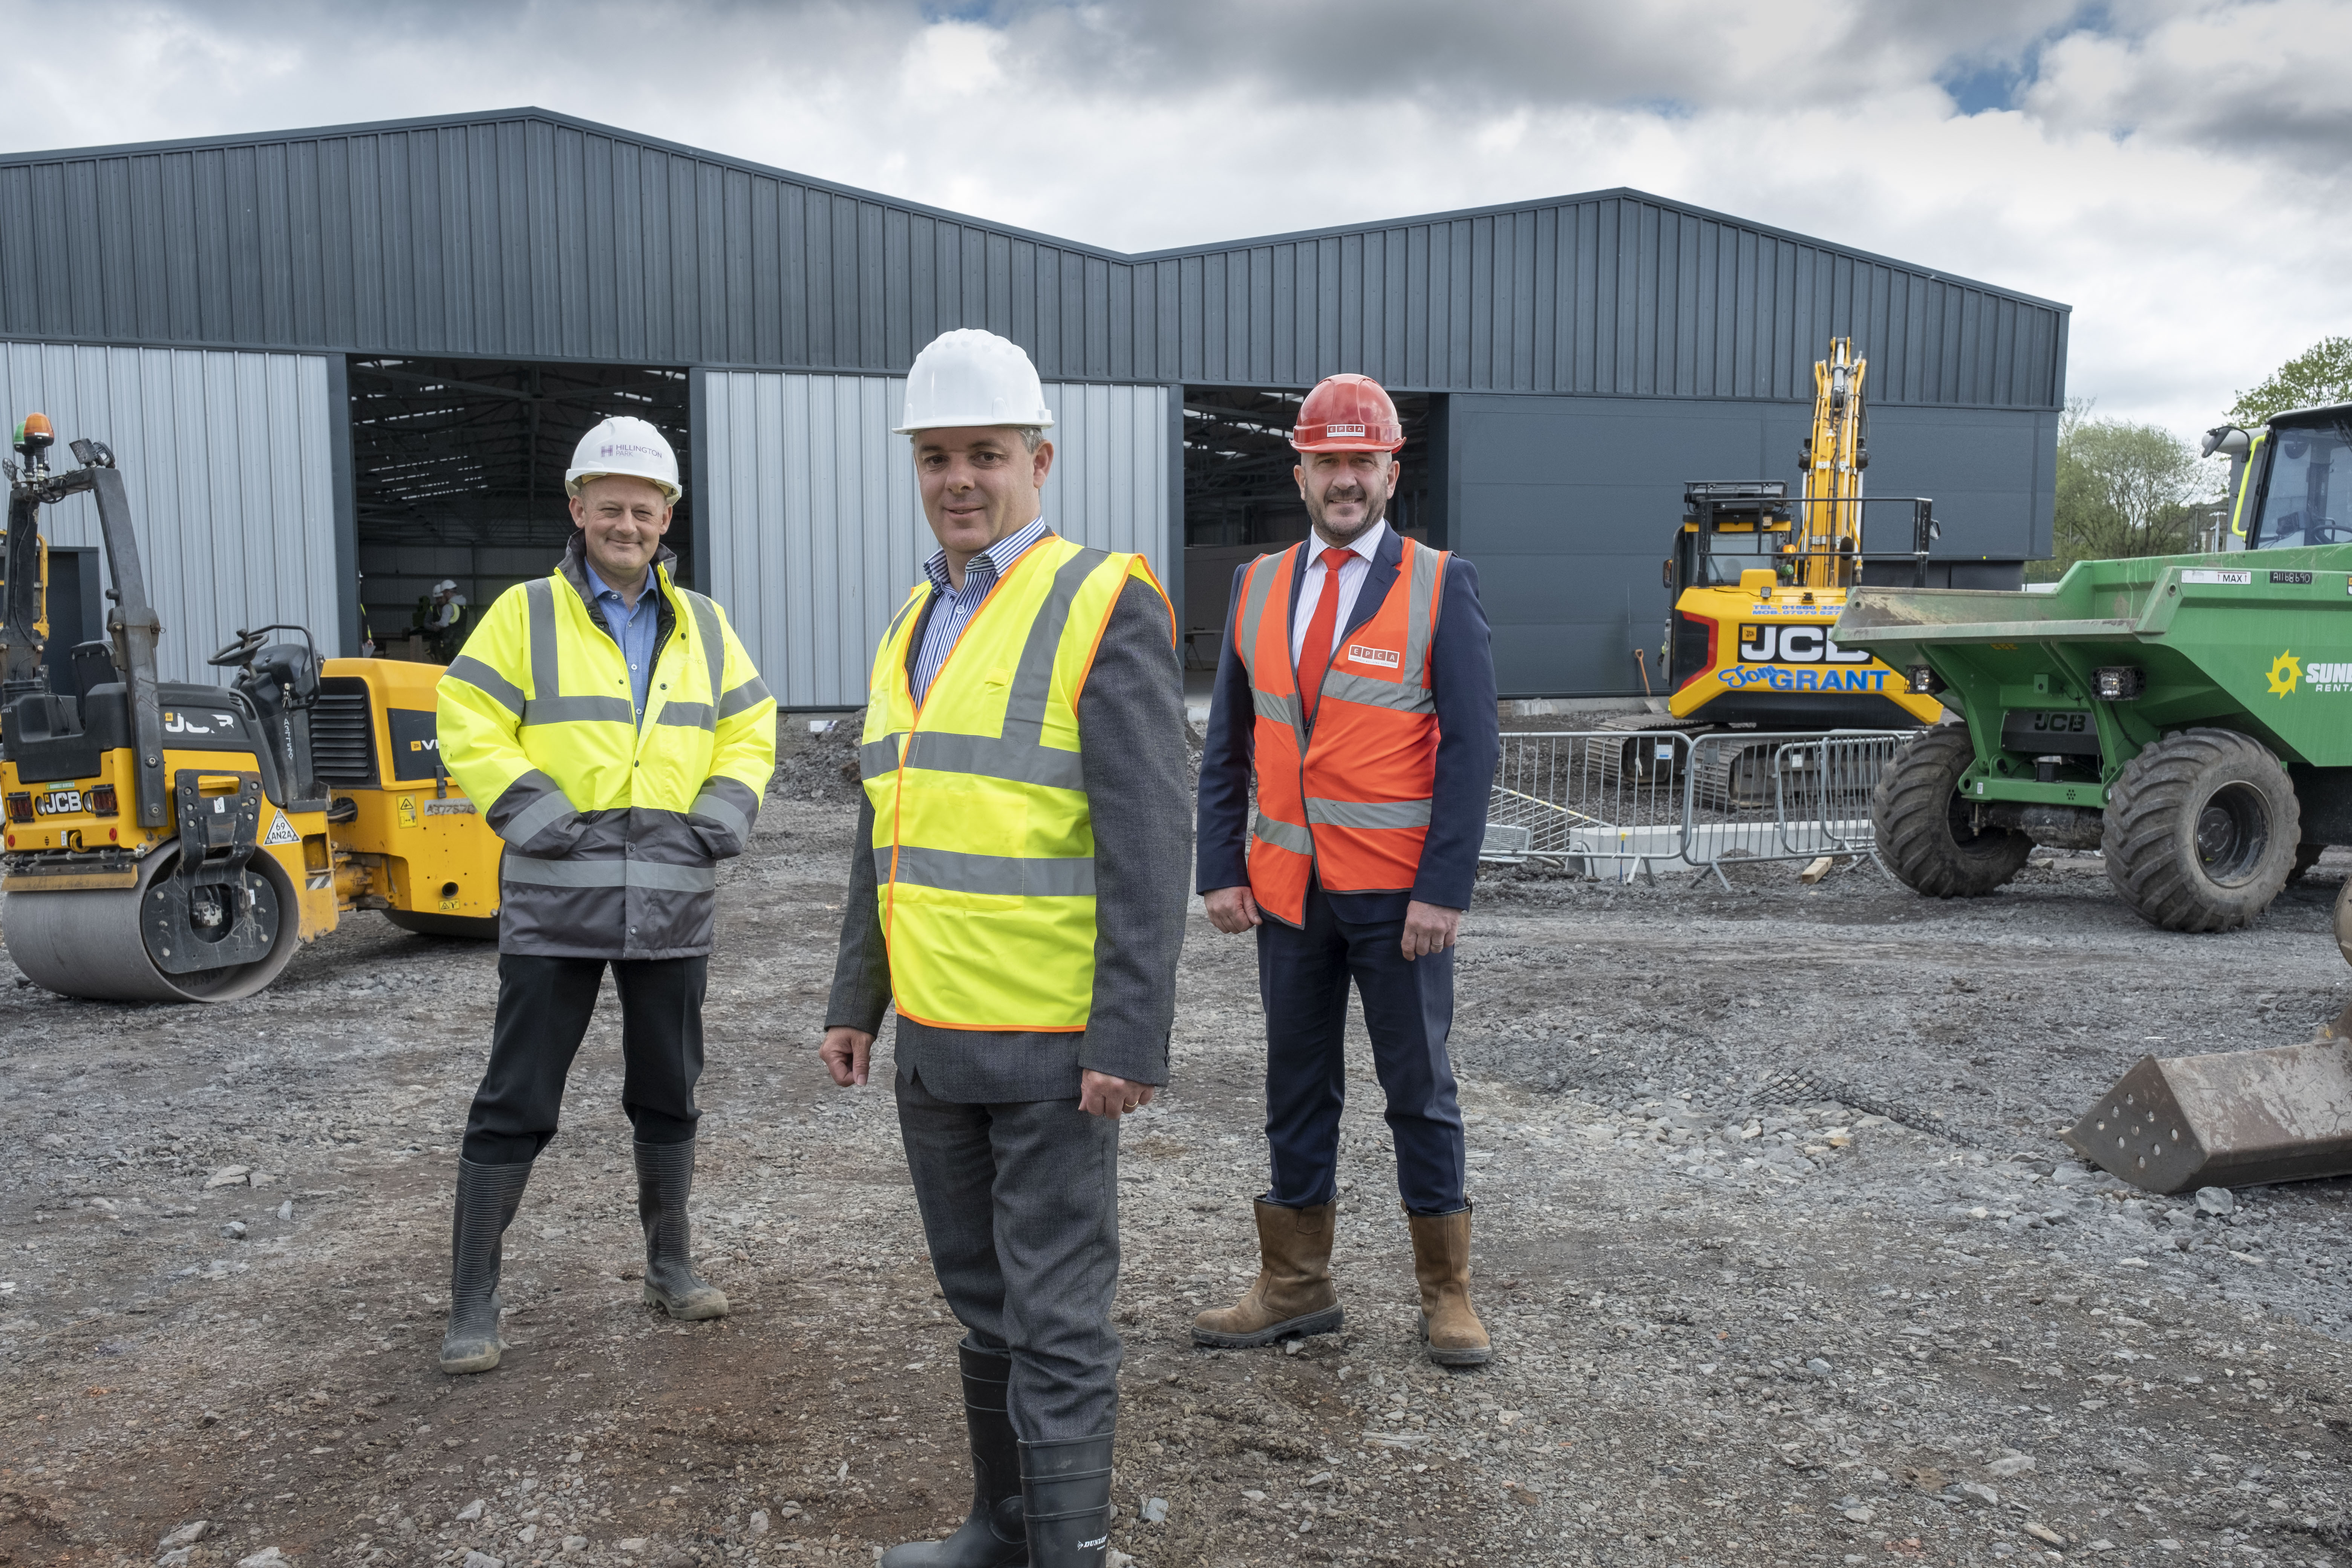 T.Quality expands Scottish operations with new £1.9m warehouse at Hillington Park